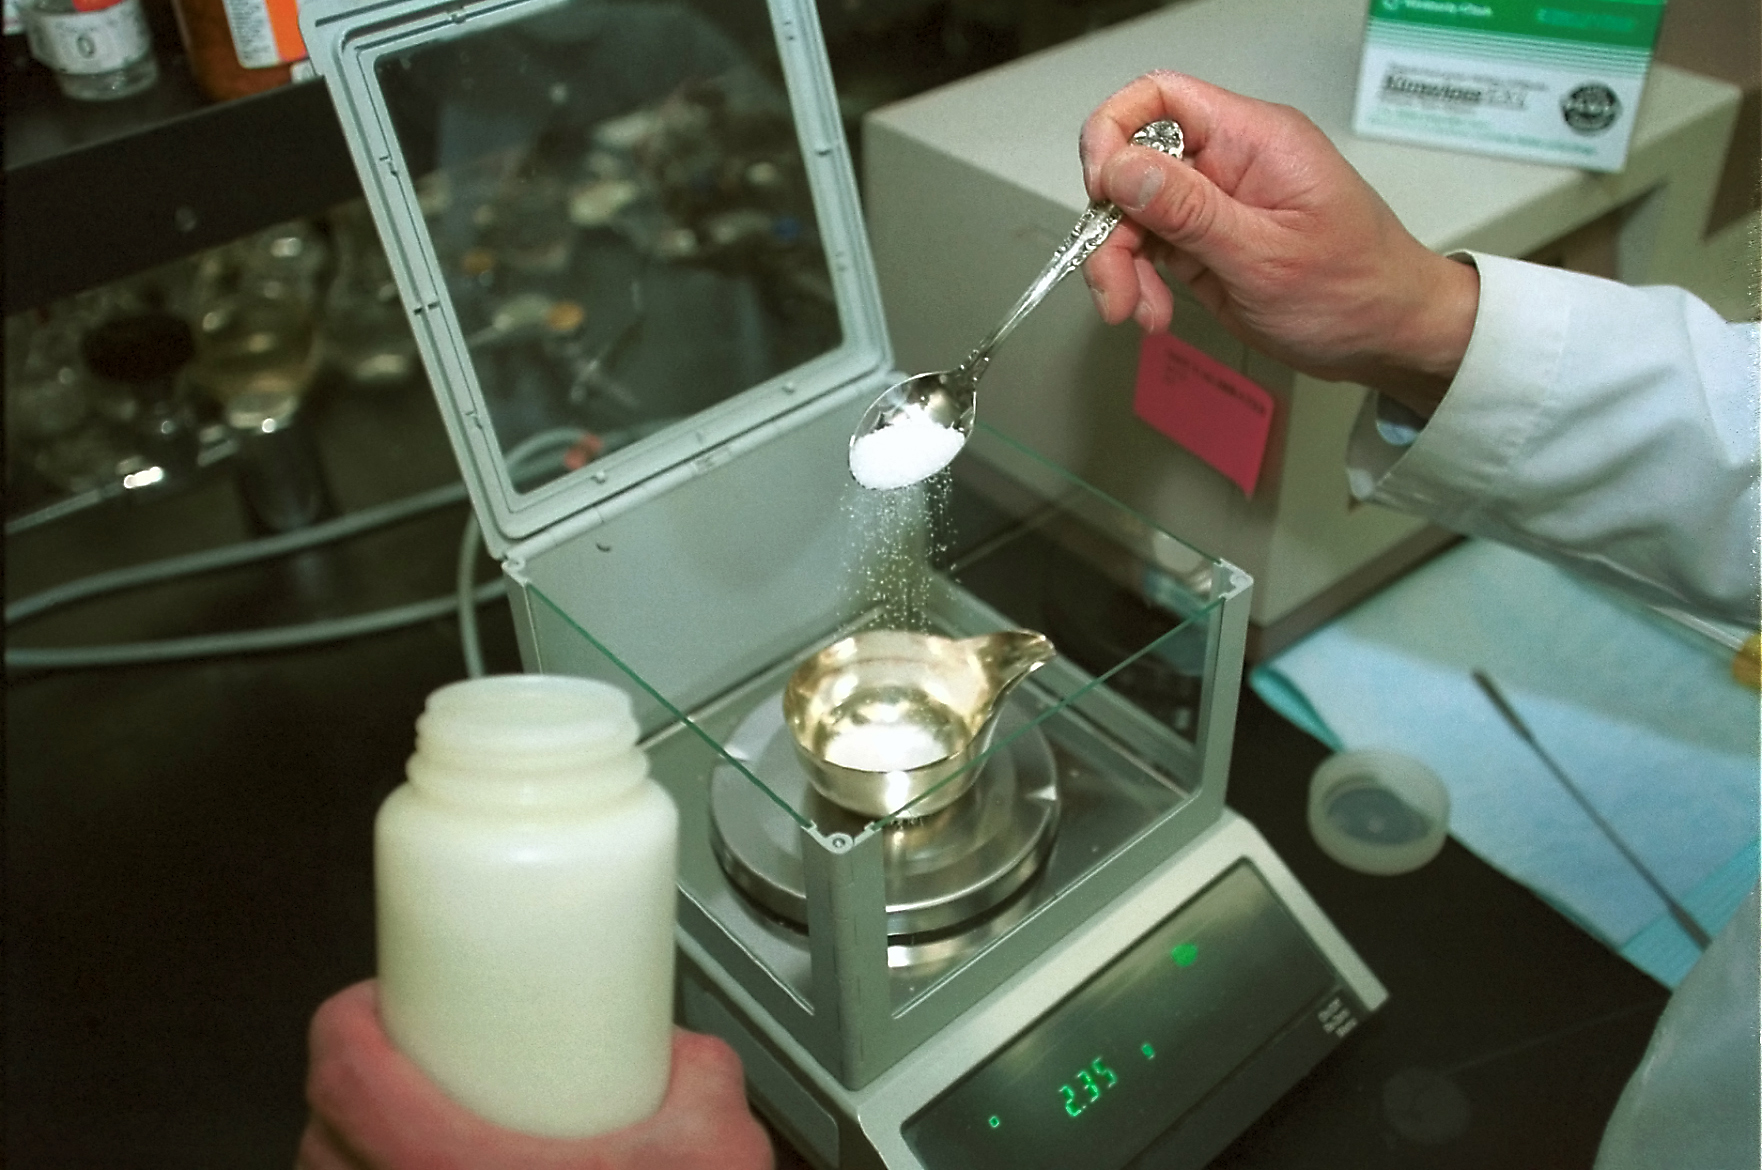 Precise amounts of drugs are measured before testing.